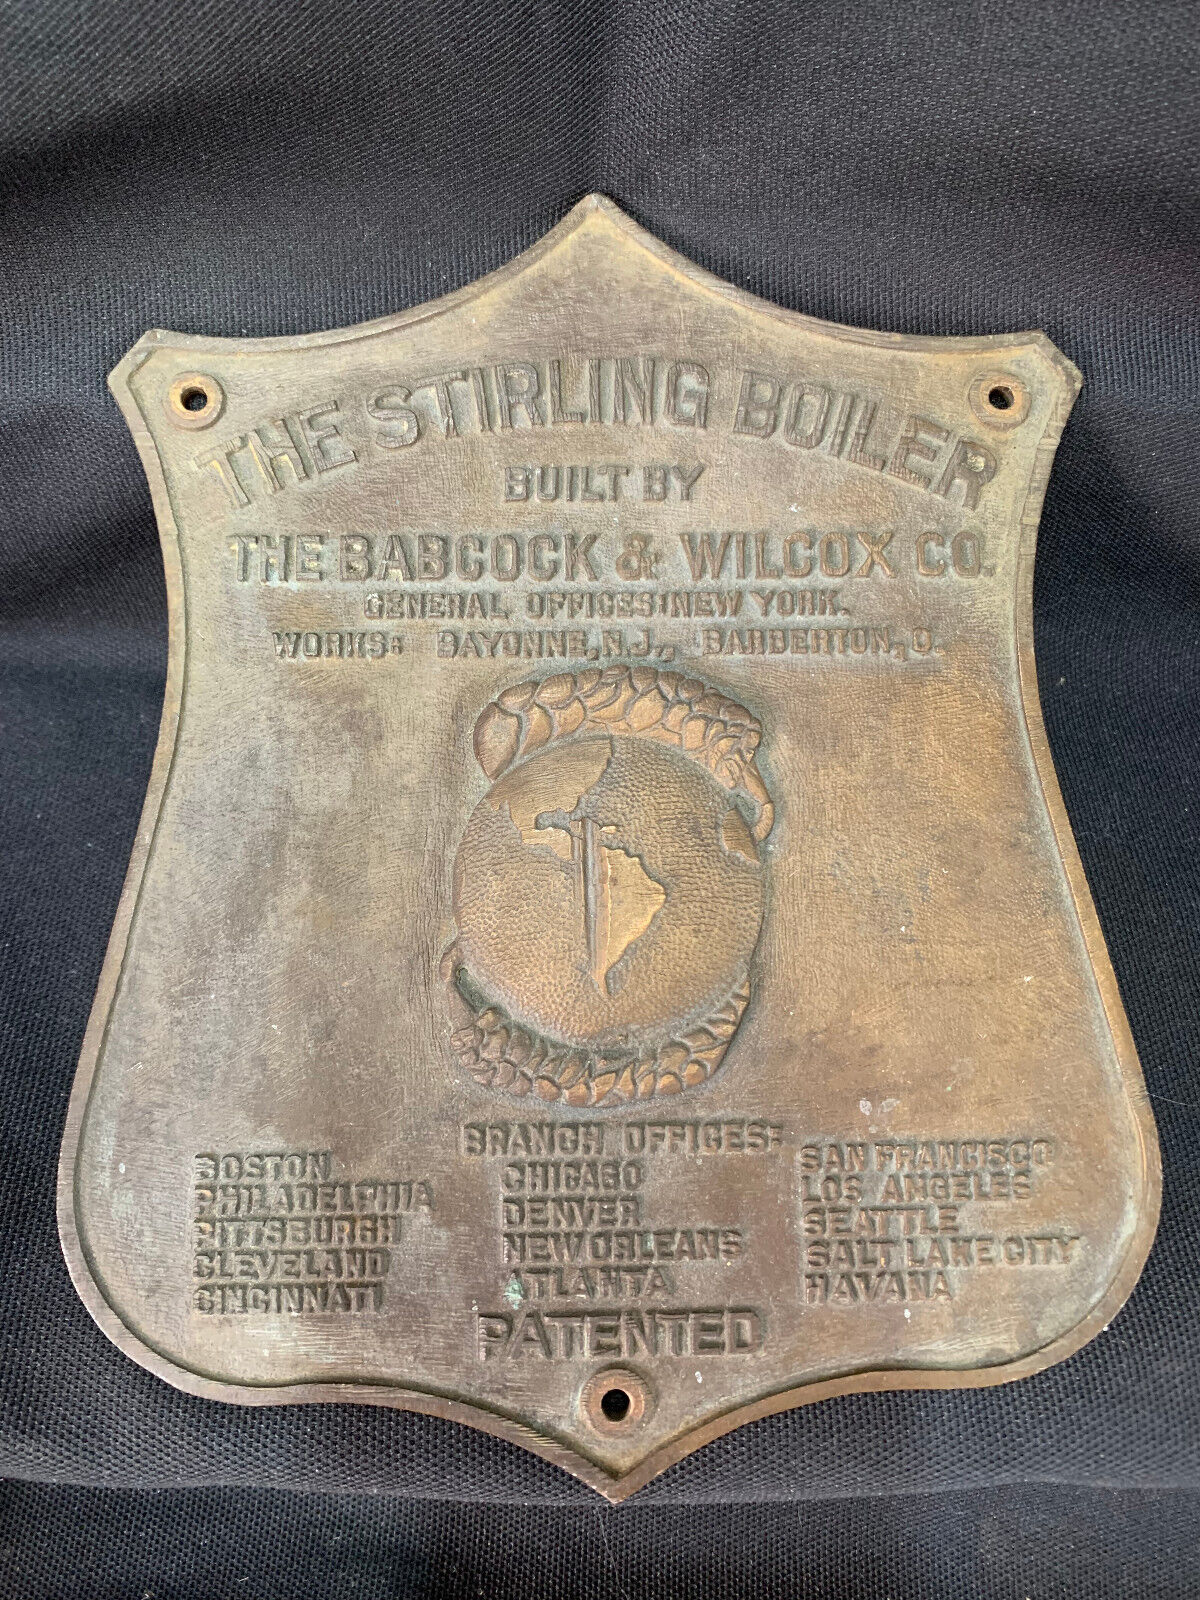 VINTAGE BRASS STIRLING BOILER BUILT BY THE BABCOCK & WILCOX COMPANY NAME PLATE